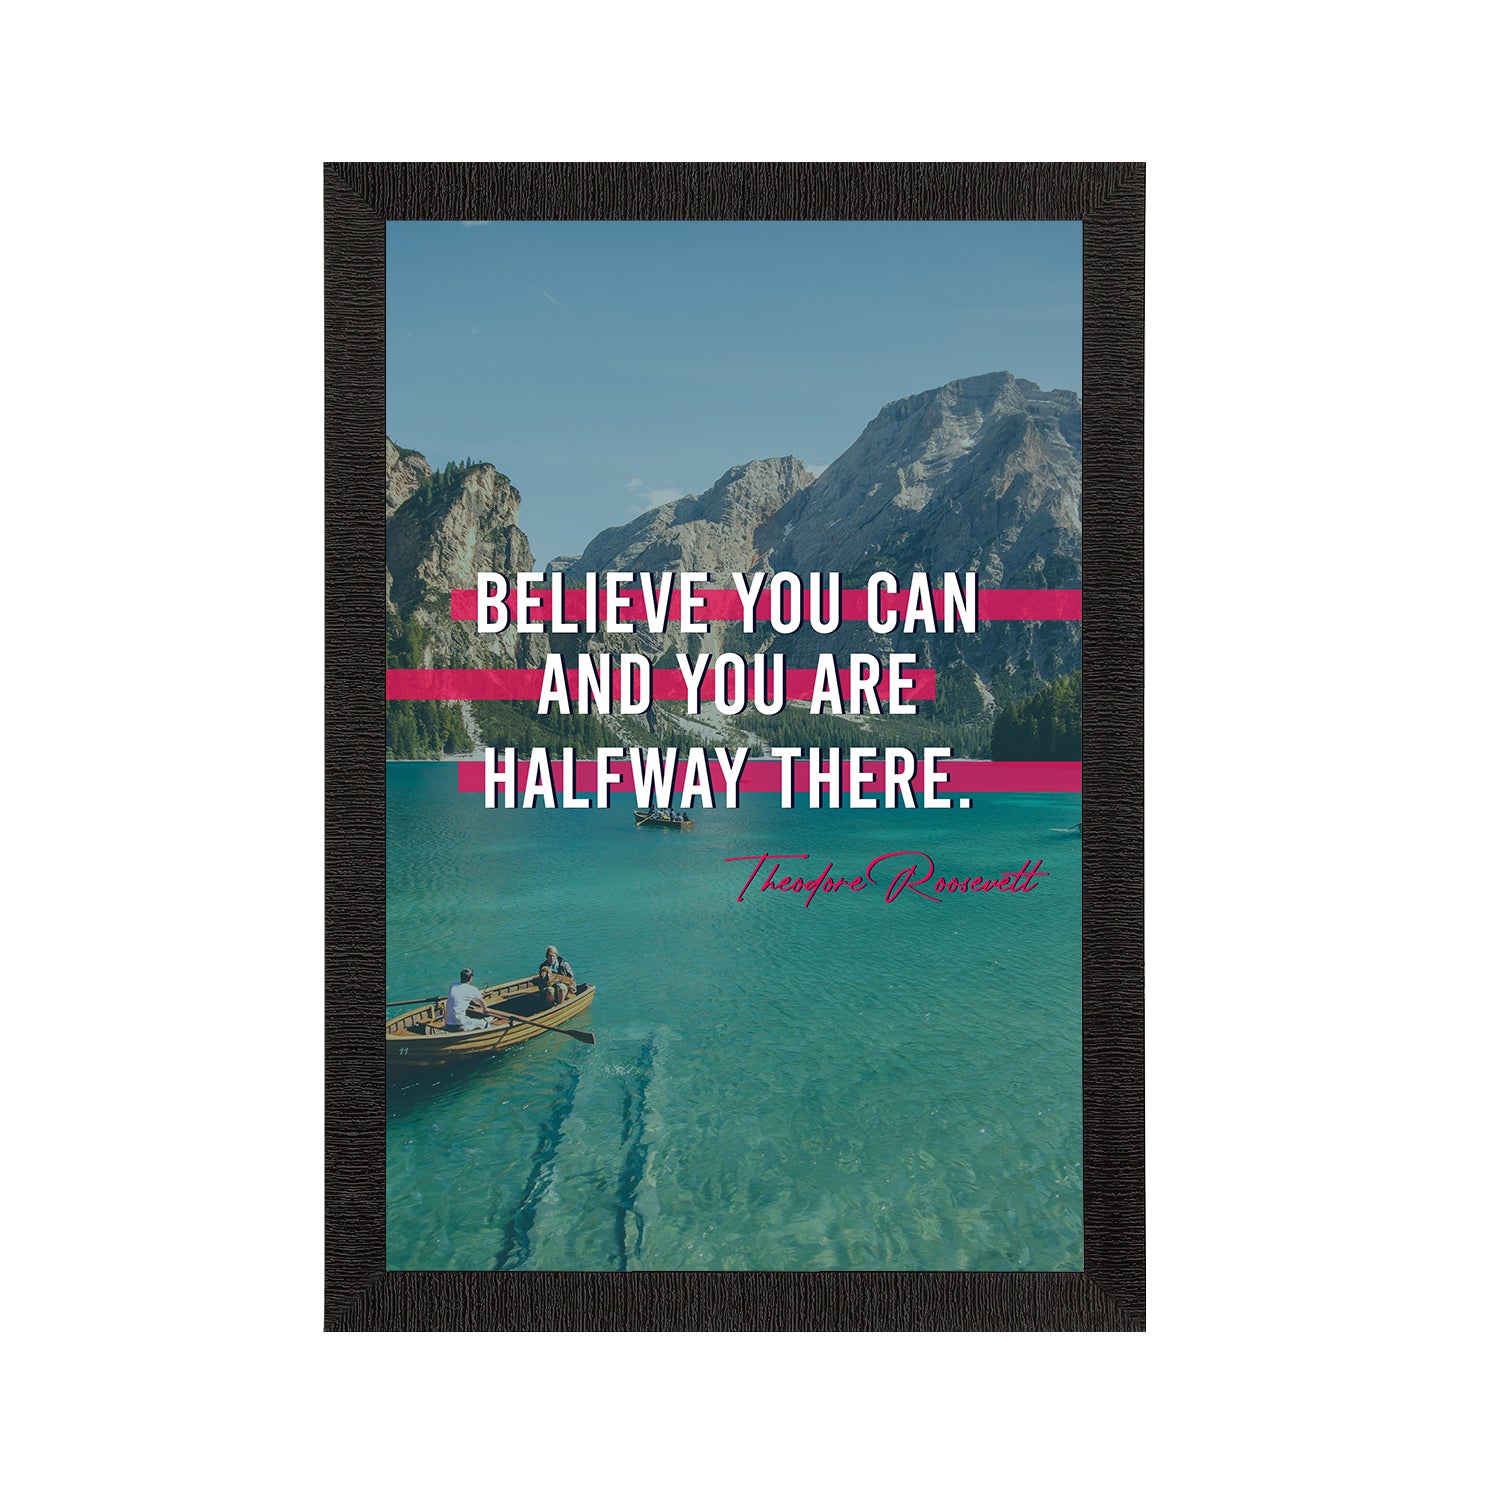 "Believe You Can And You Are HalfWay There" Motivational Quote Satin Matt Texture UV Art Painting